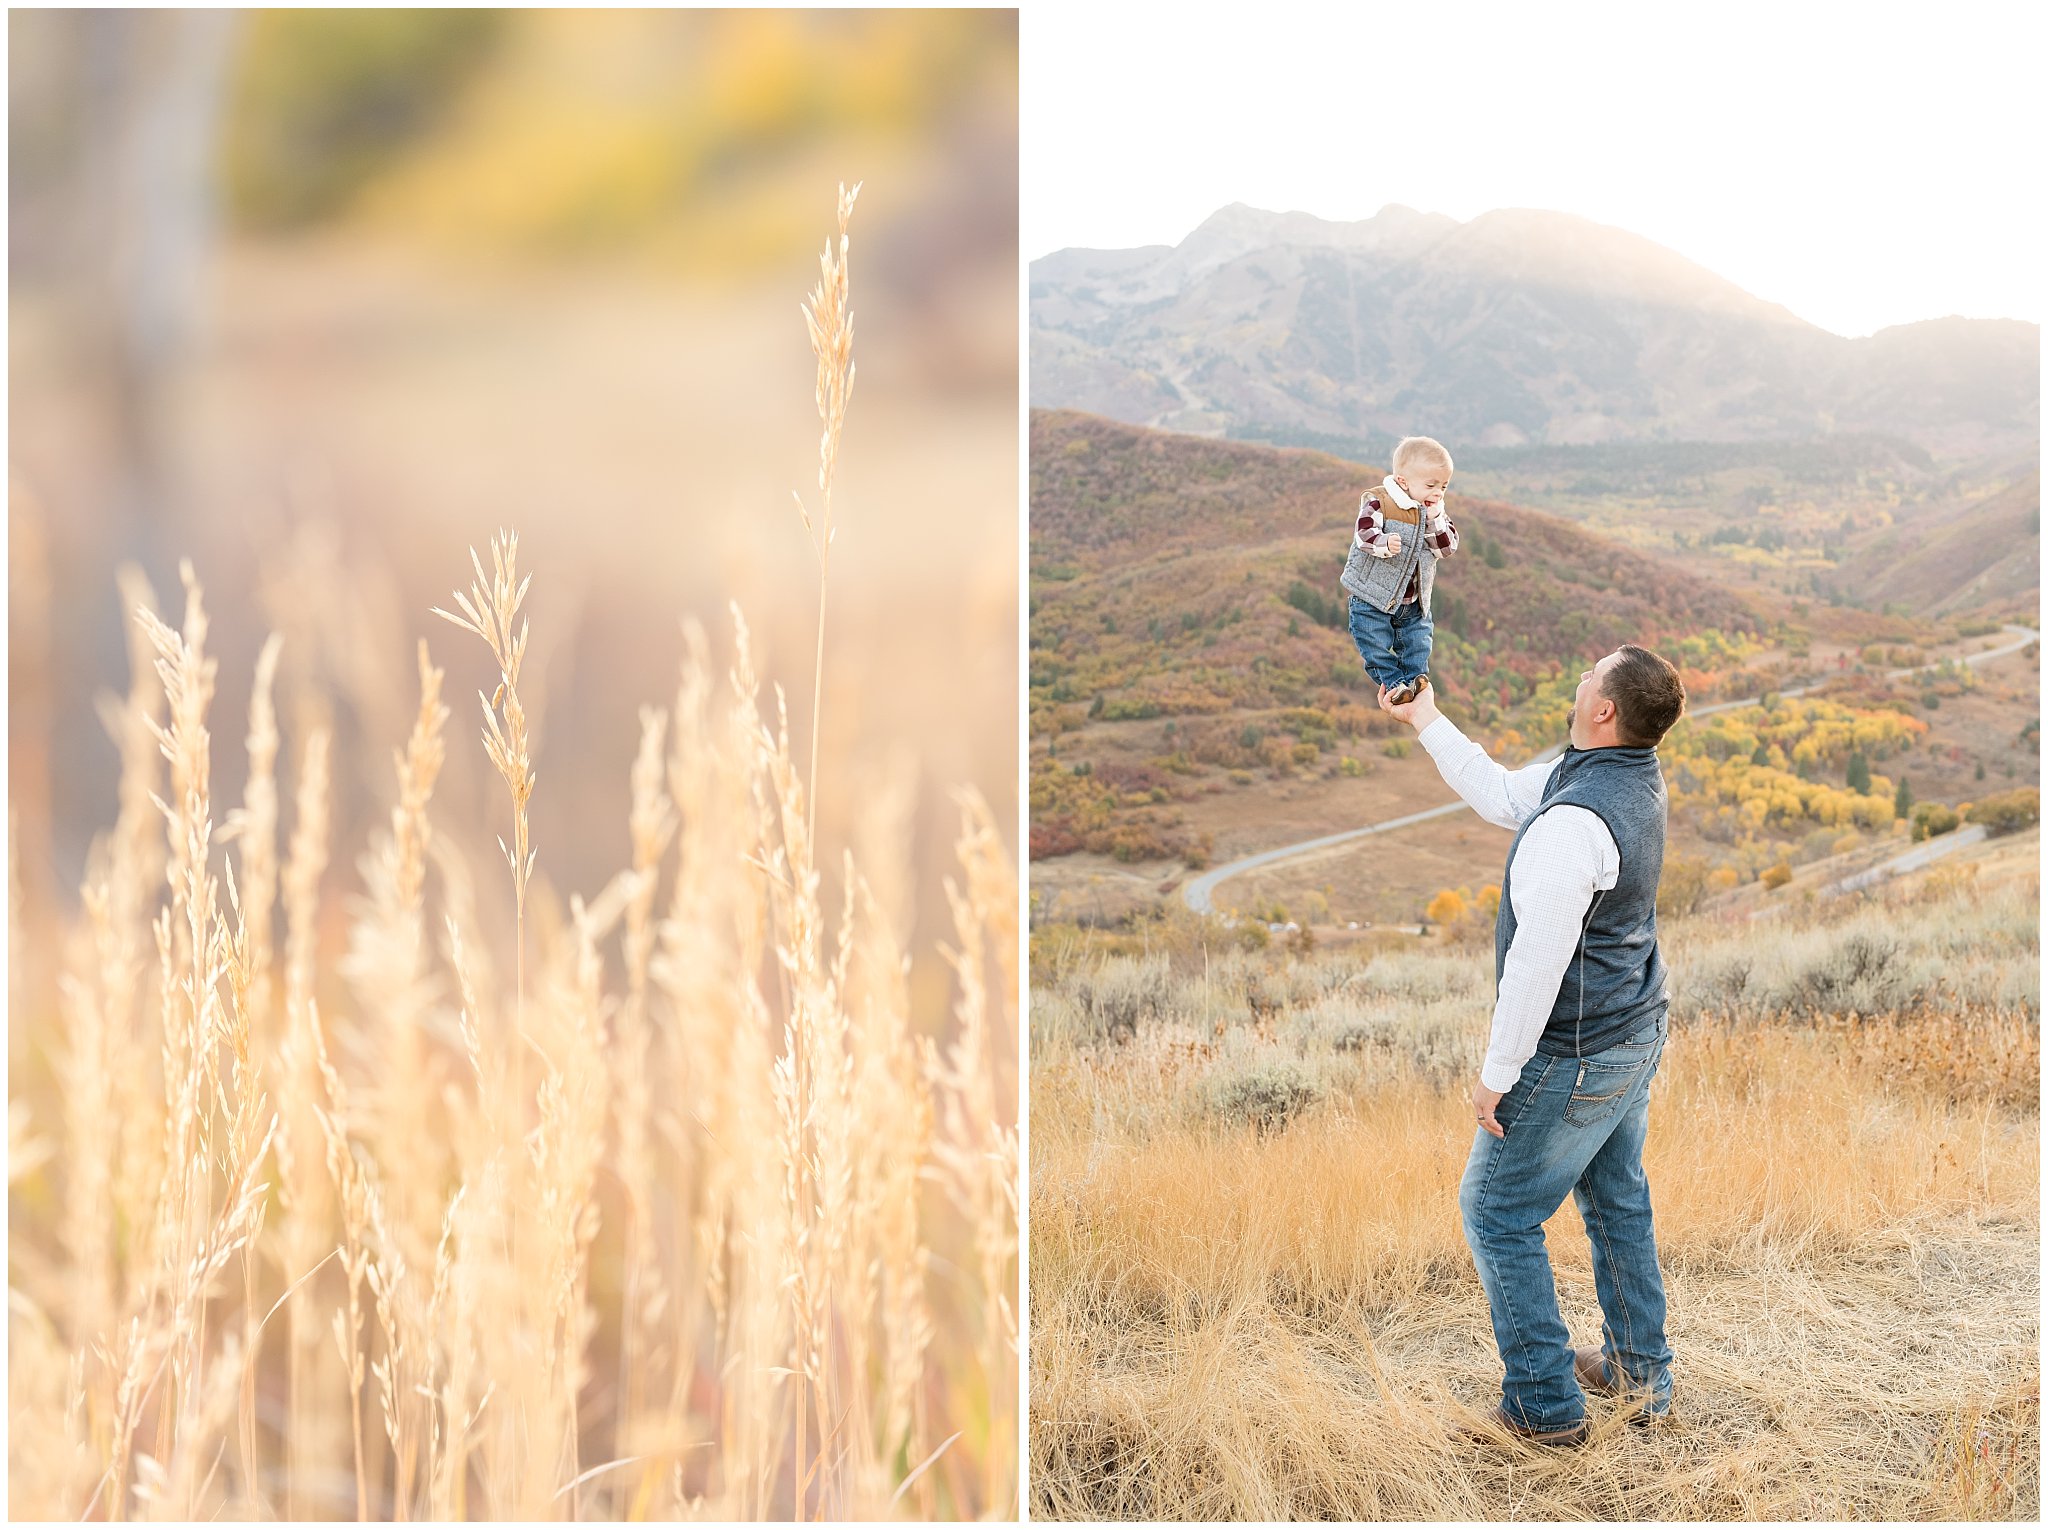 Dad holding infant in the air in the mountains | Fall family photo session at Snowbasin | Snowbasin Resort | Jessie and Dallin Photography